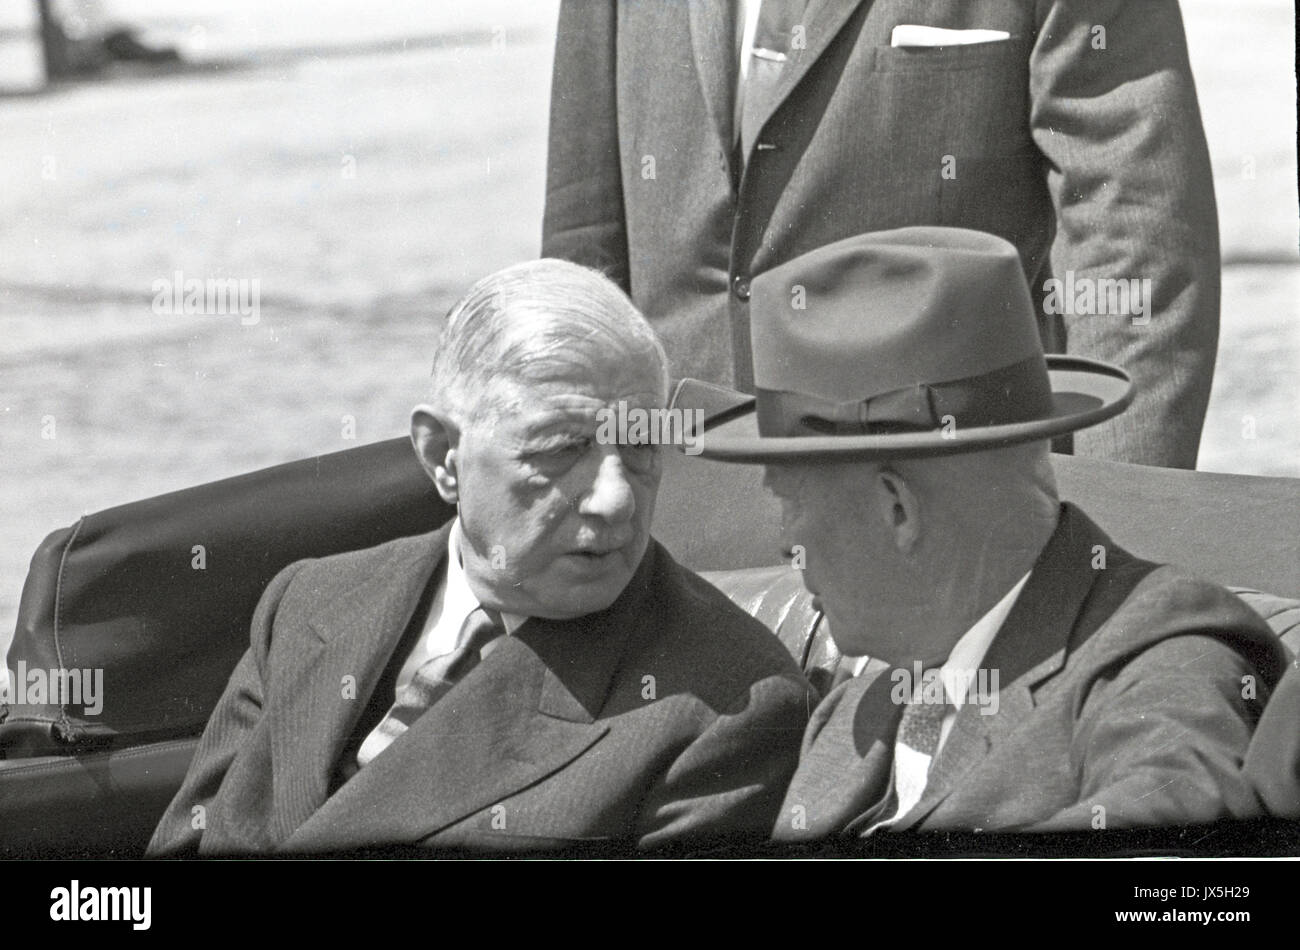 United States President Dwight D. Eisenhower, right, rides in a limosine with President Charles de Gaulle of France, left, following an arrival ceremony at Washington National Airport in Washington, DC on April 22, 1960. President de Gaulle is in Washington for a four-day official visit. Credit: Benjamin E. 'Gene' Forte/CNP Photo: Benjamin E. 'gene' Forte/Consolidated/dpa Stock Photo